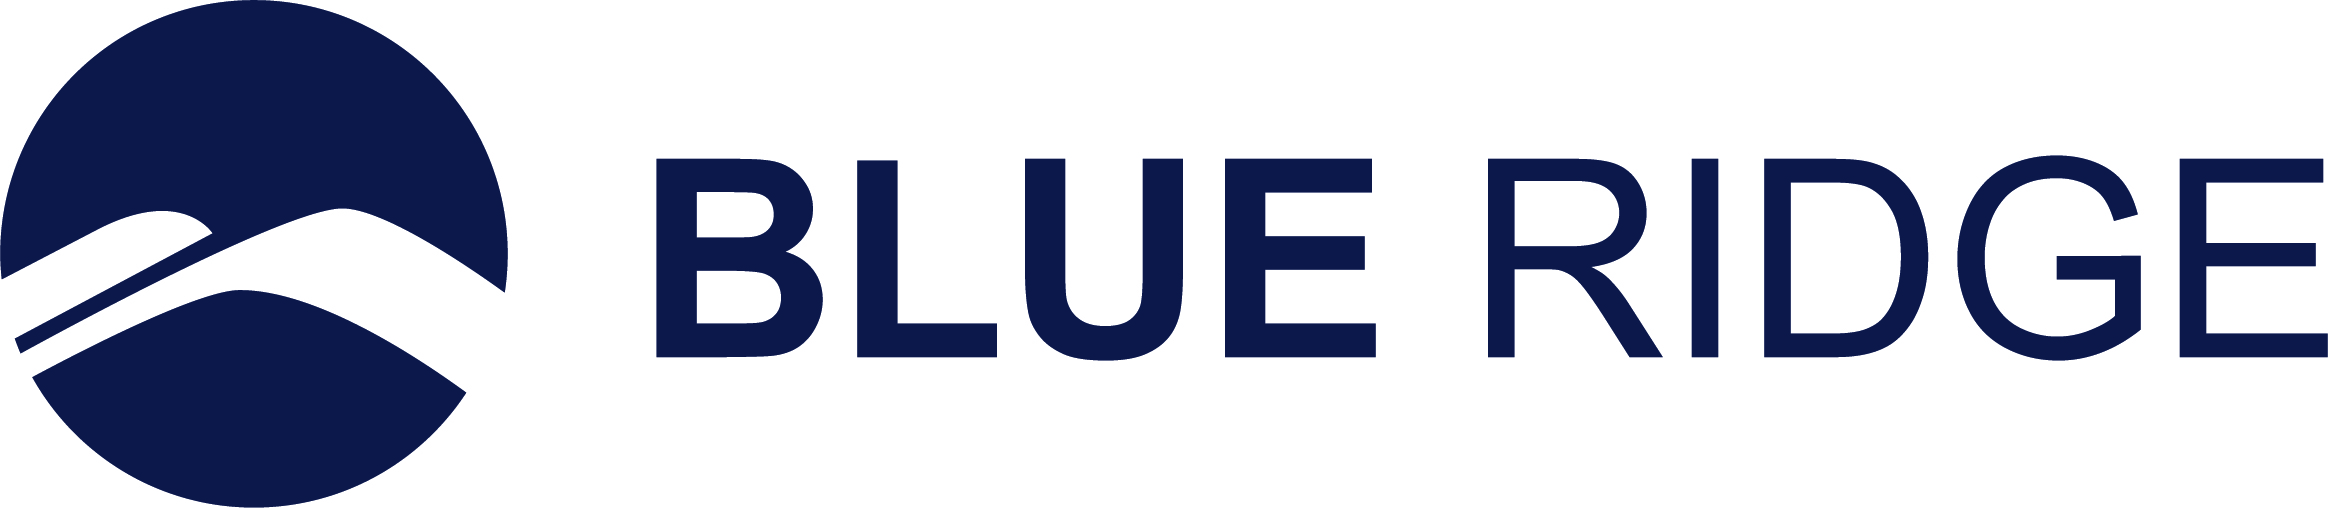 Ed Rusch, CMO at Blue Ridge Named to Prestigious Forbes Communications Council